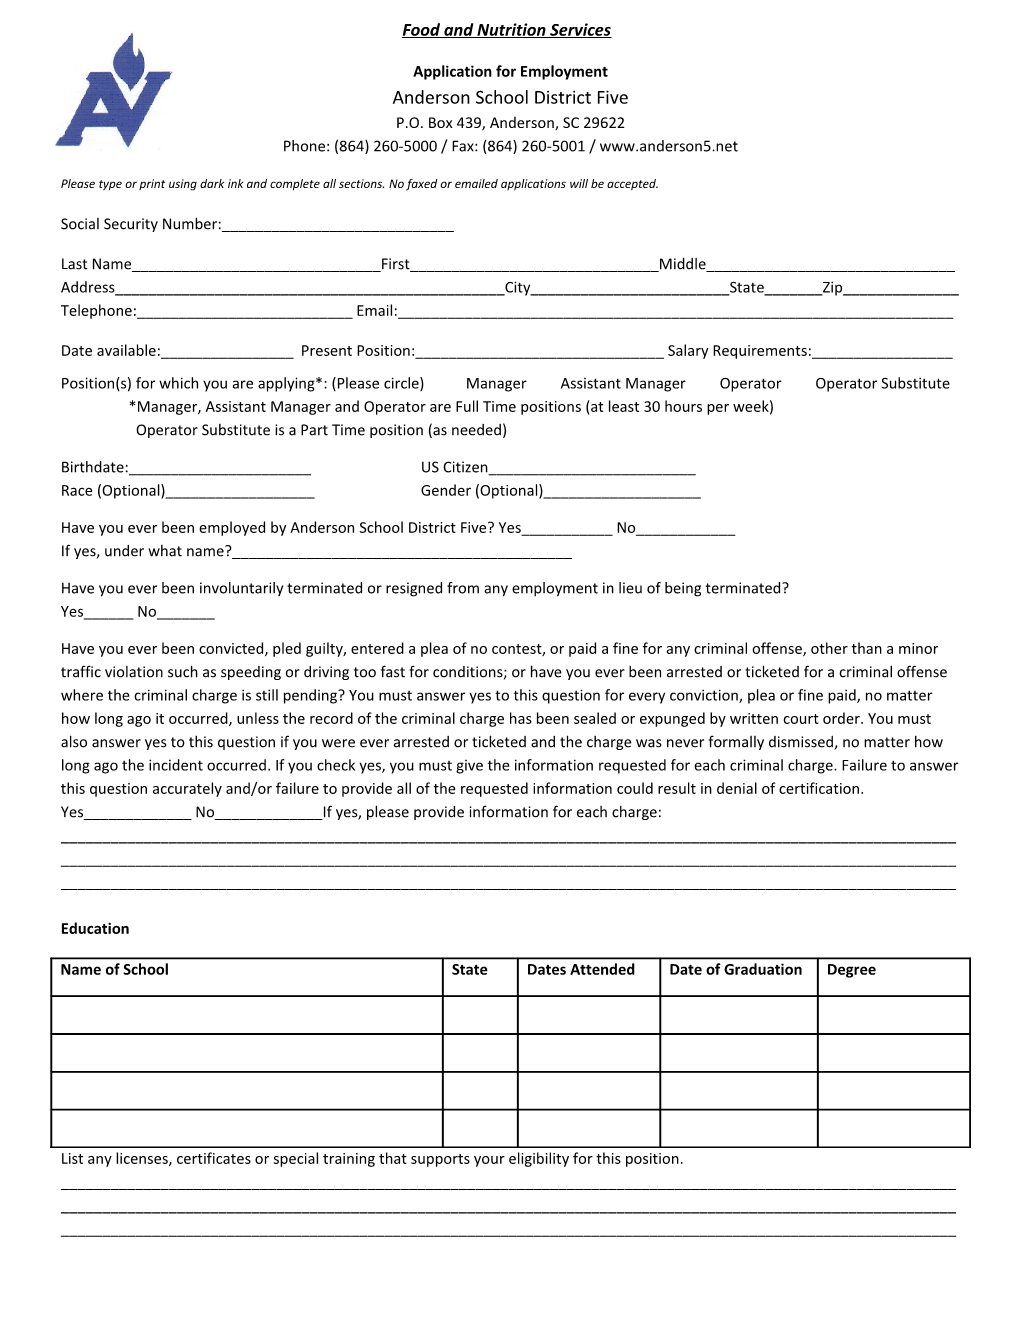 Application for Employment Anderson School District Five P.O. Box 439, Anderson, SC 29622